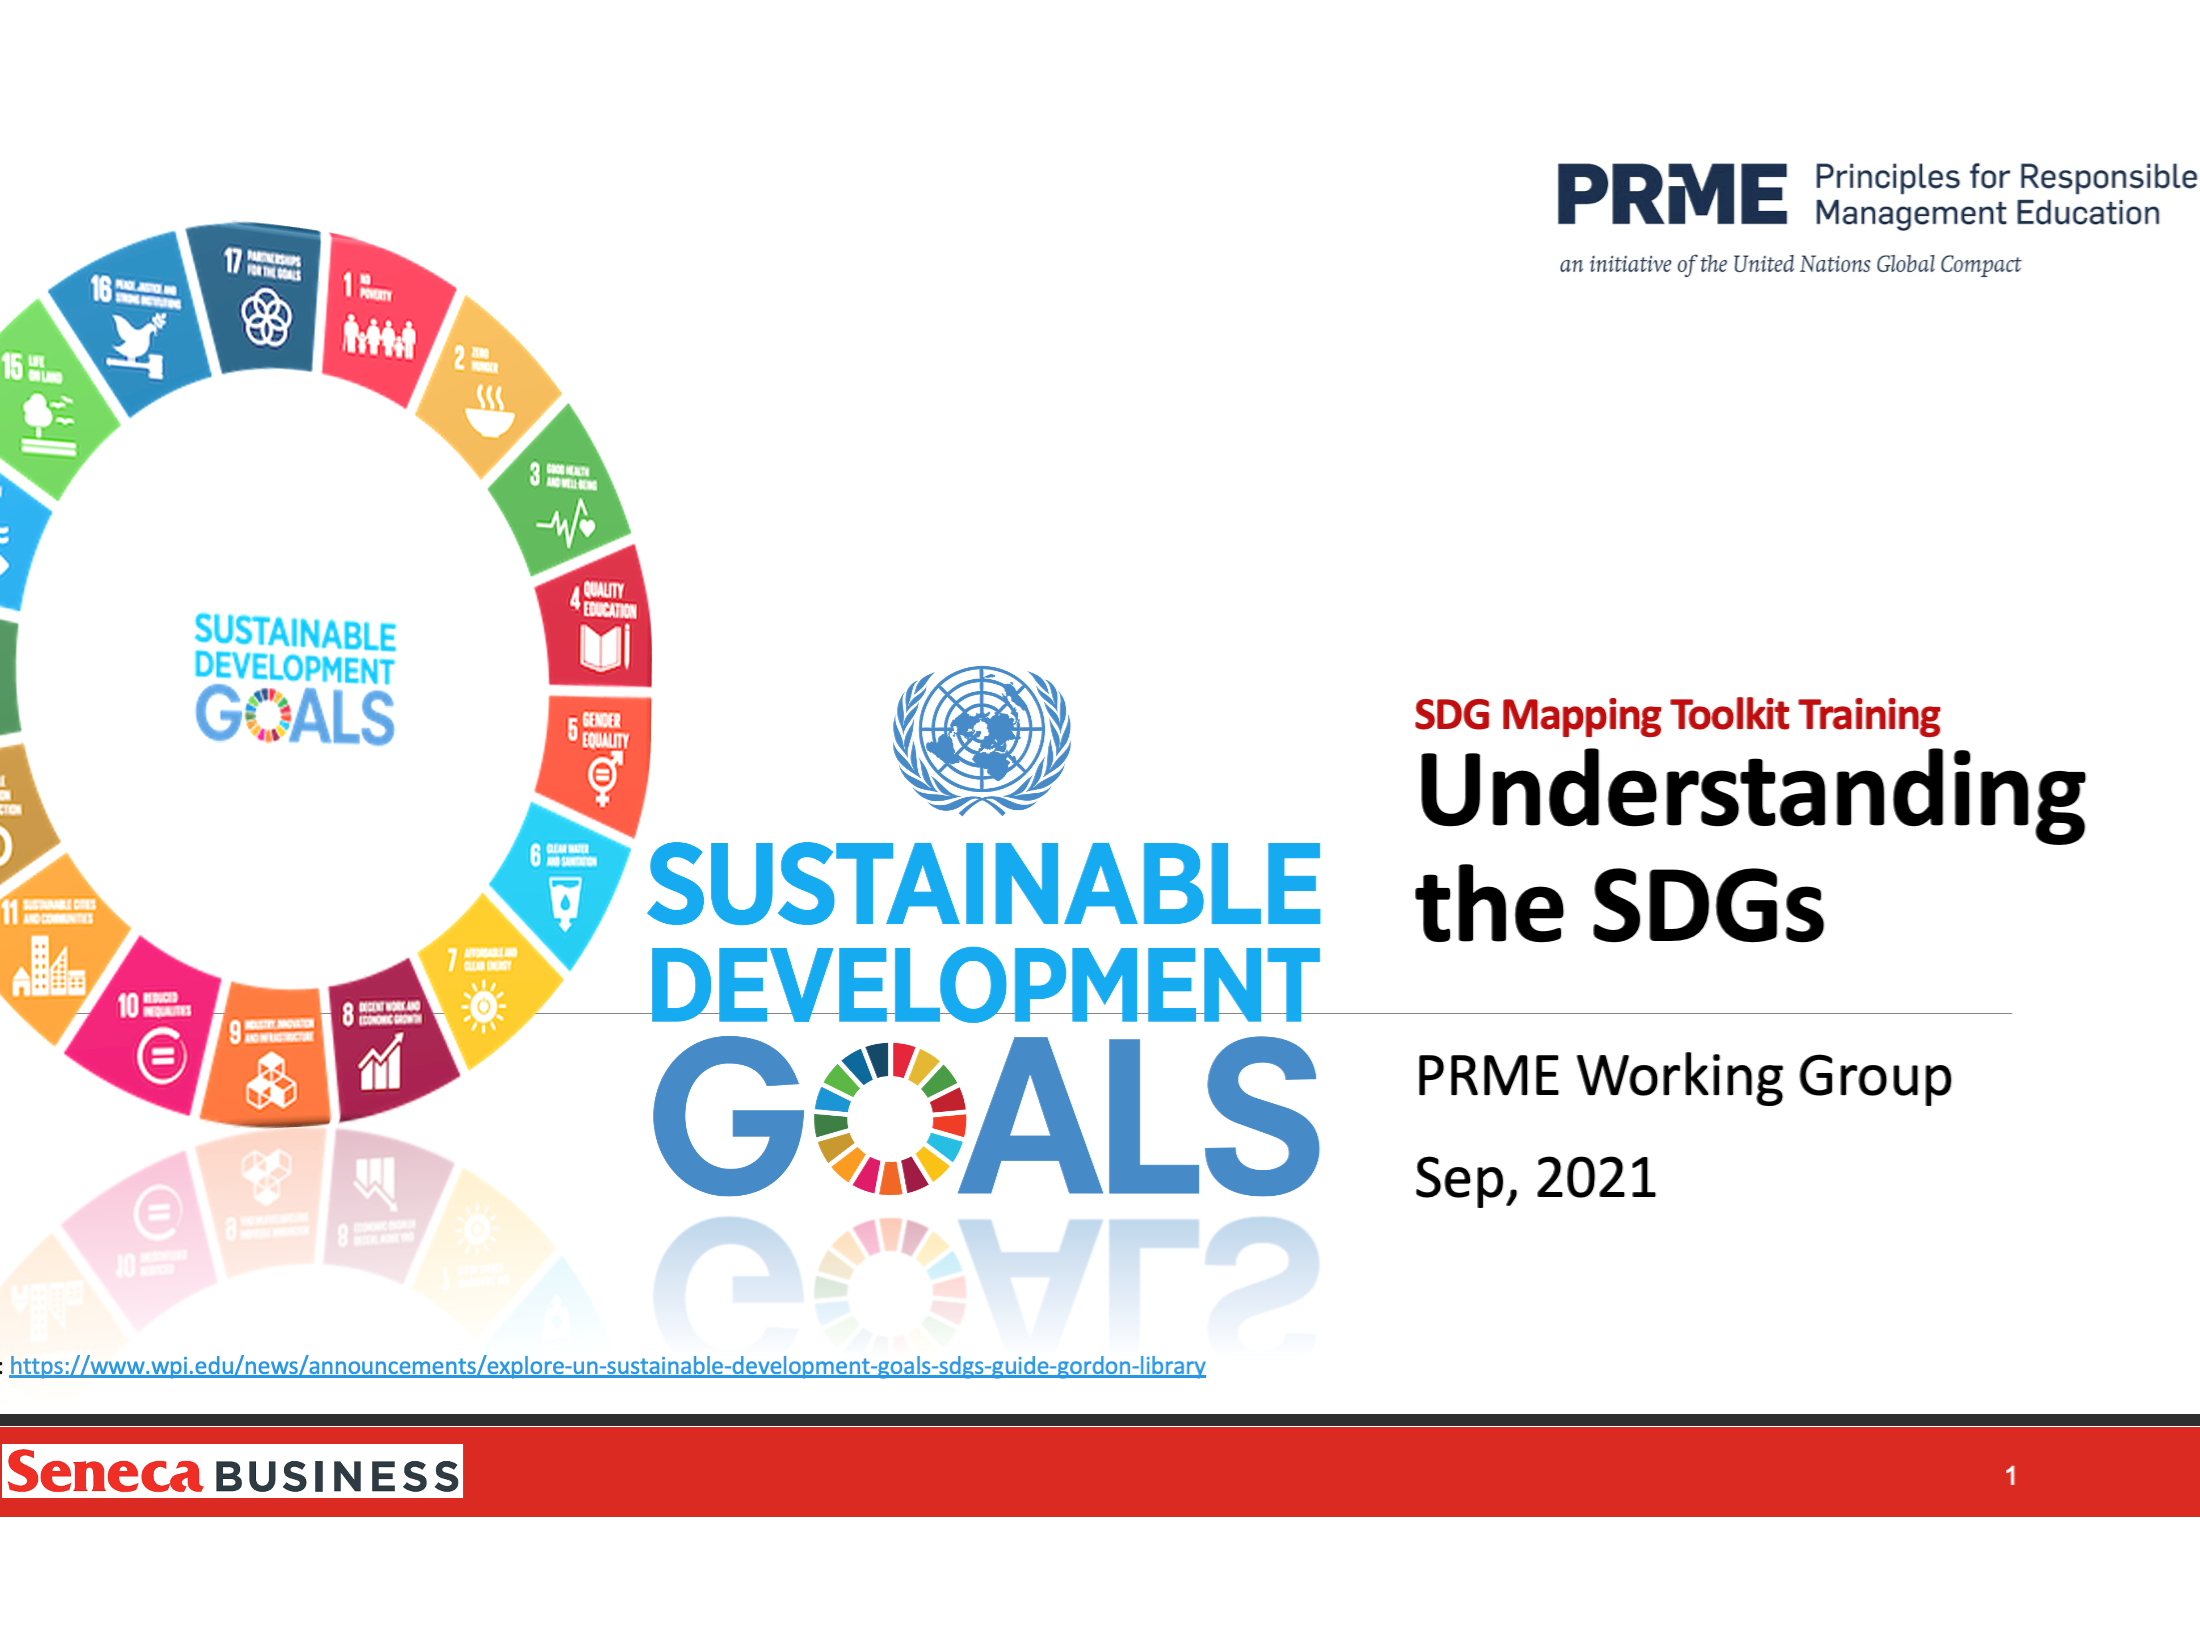 Seneca Business Mapping to the Sustainable Development Goals (SDGs)